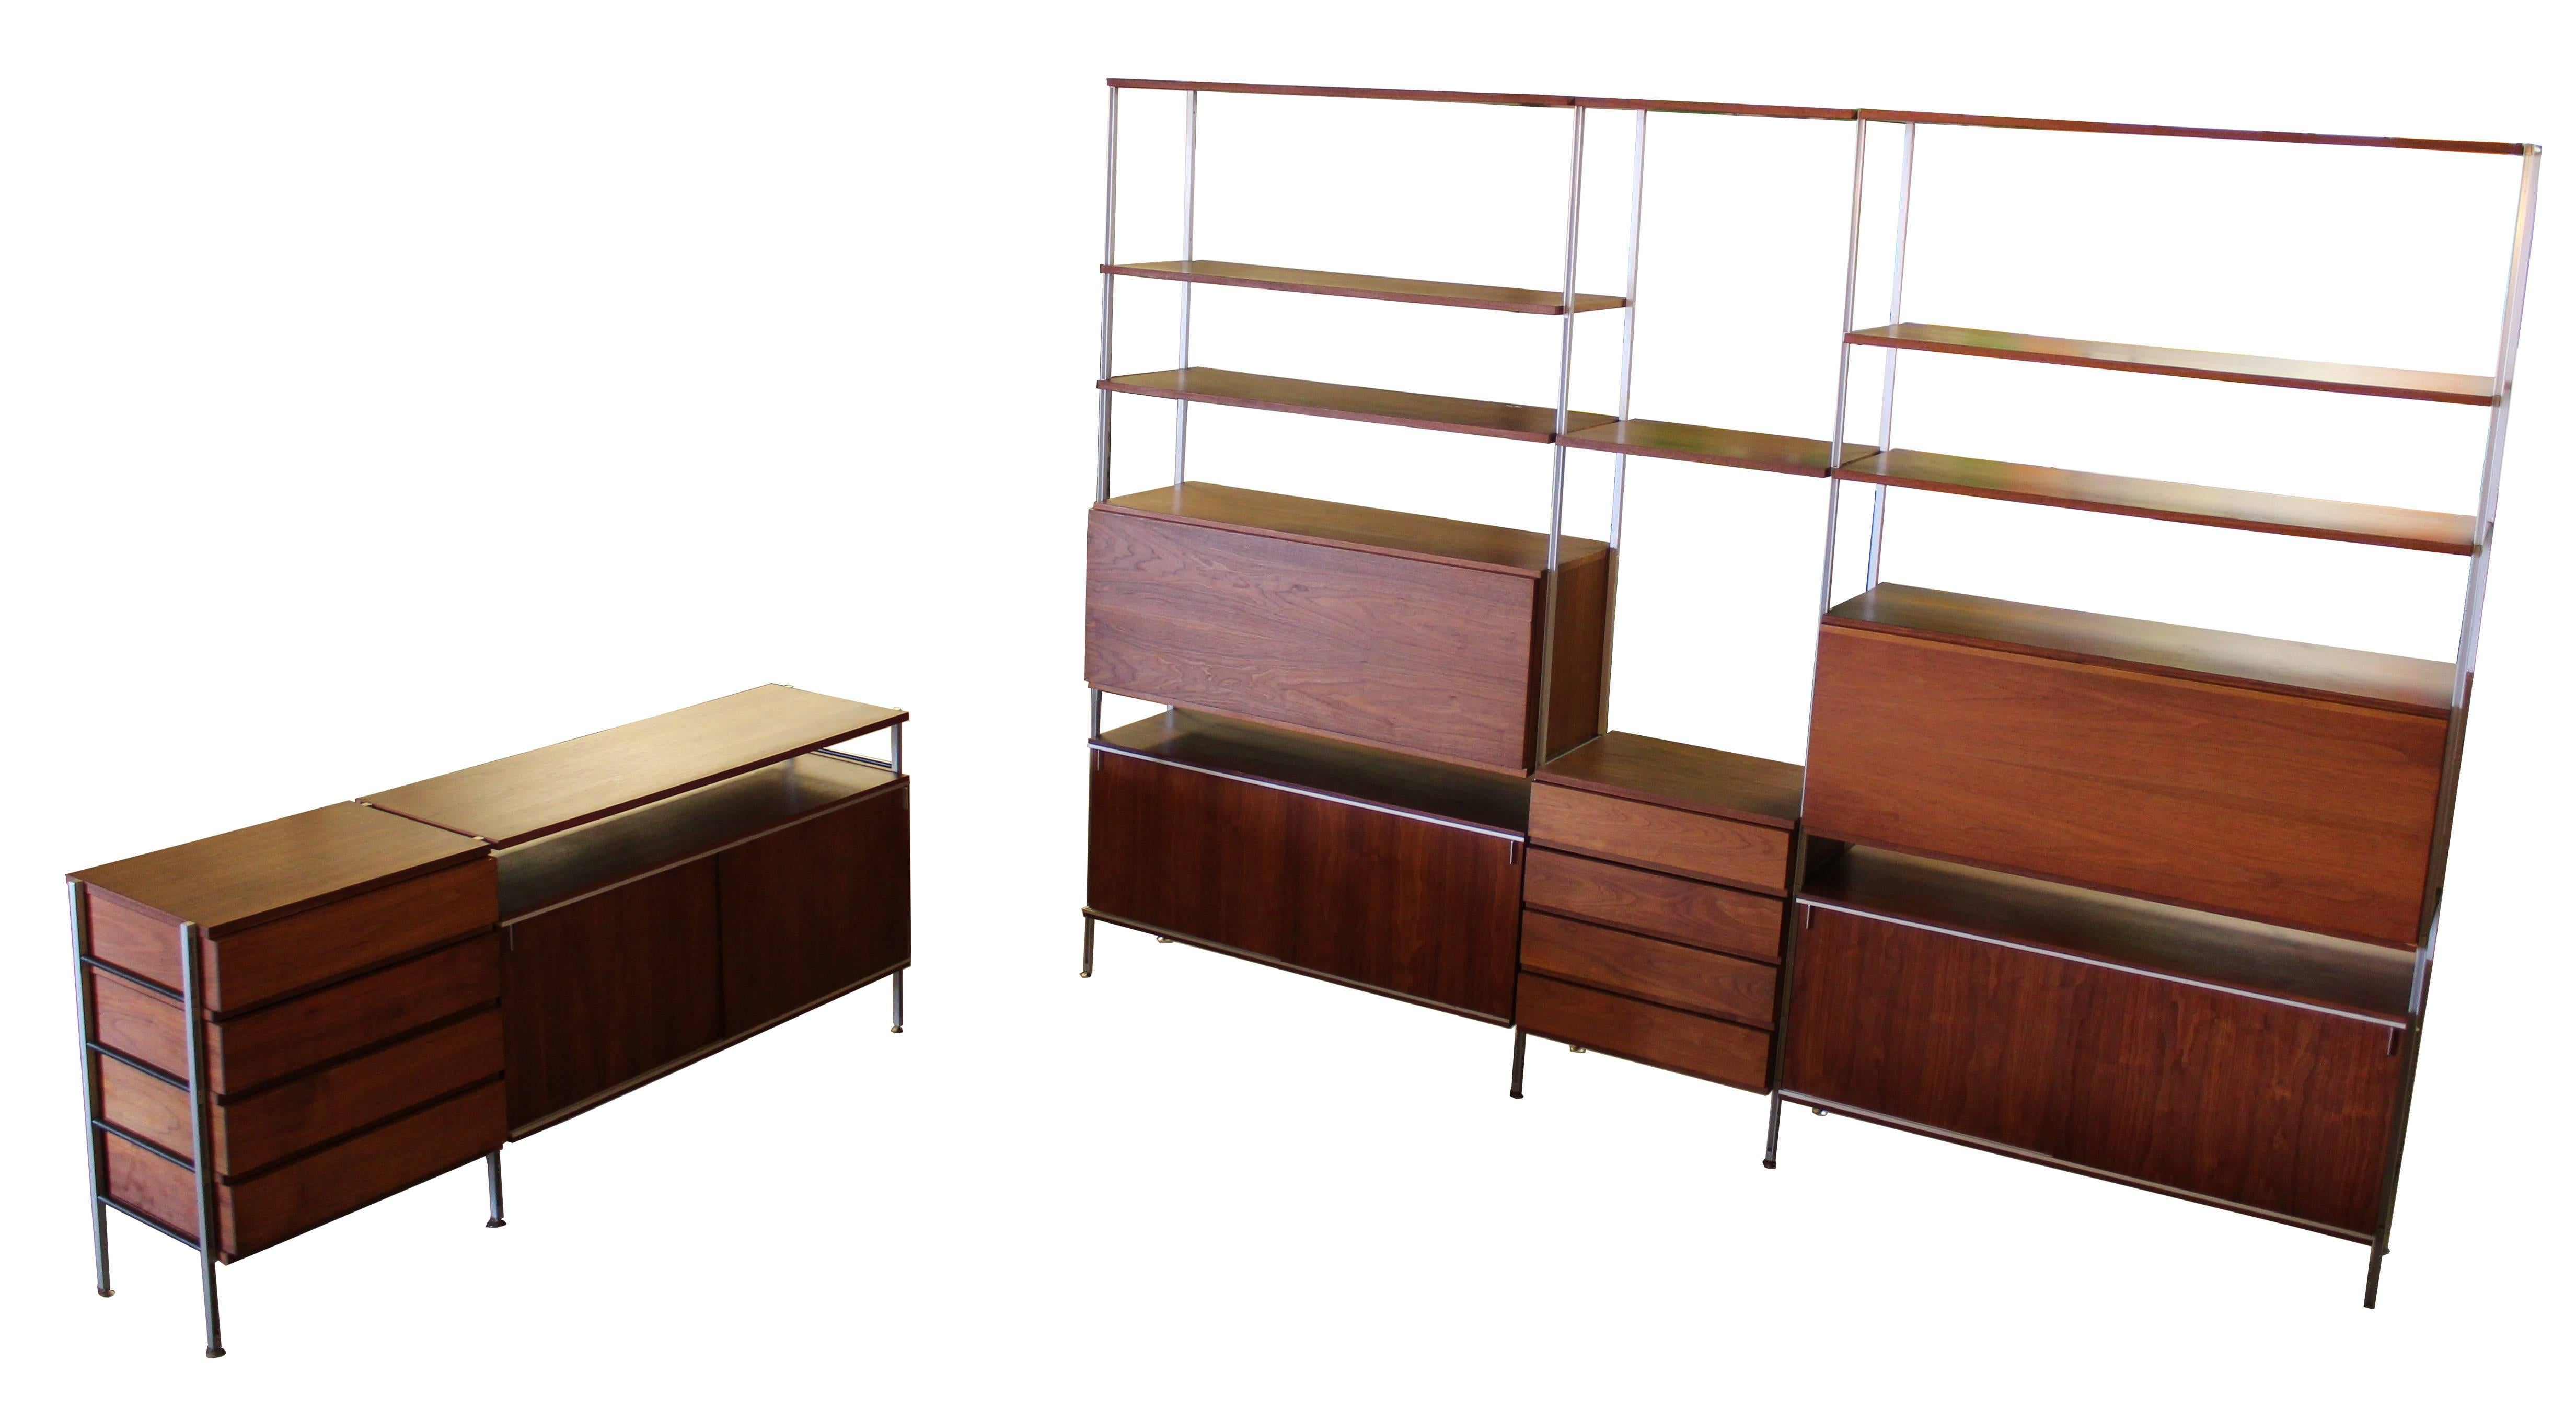 
Inredible, very large, walnut wall unit and matching credenza by Hugh Acton. Wall unit has compartmentalized pull down desk space with a light. Retains an original metal plaque. The dimensions of the wall unit are 113.5